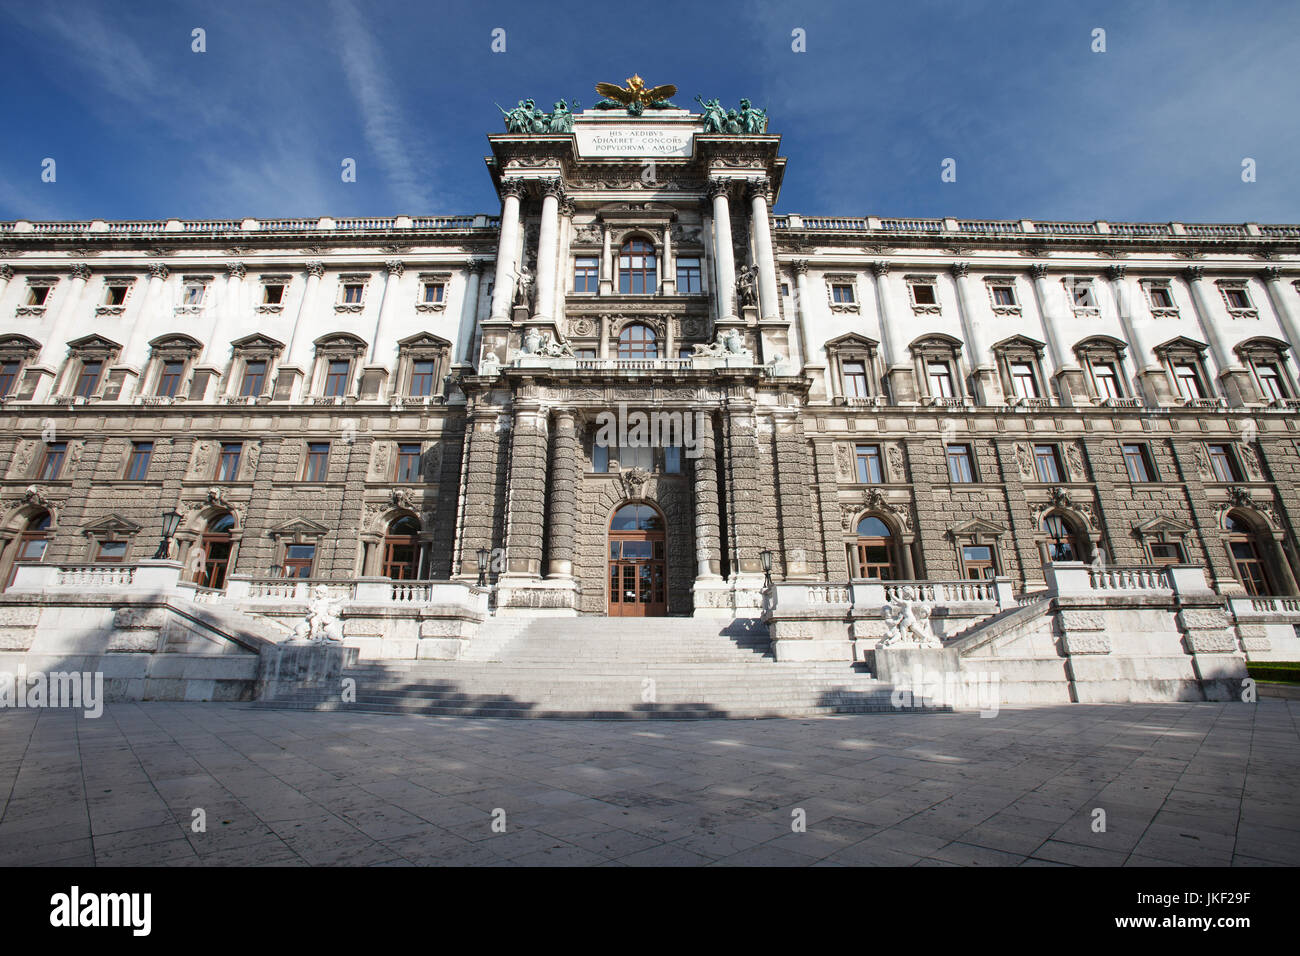 Building of Neue Burg (New Castle), part of Hofburg Imperial Palace in Vienna, frontal view of southern part. Austria Stock Photo